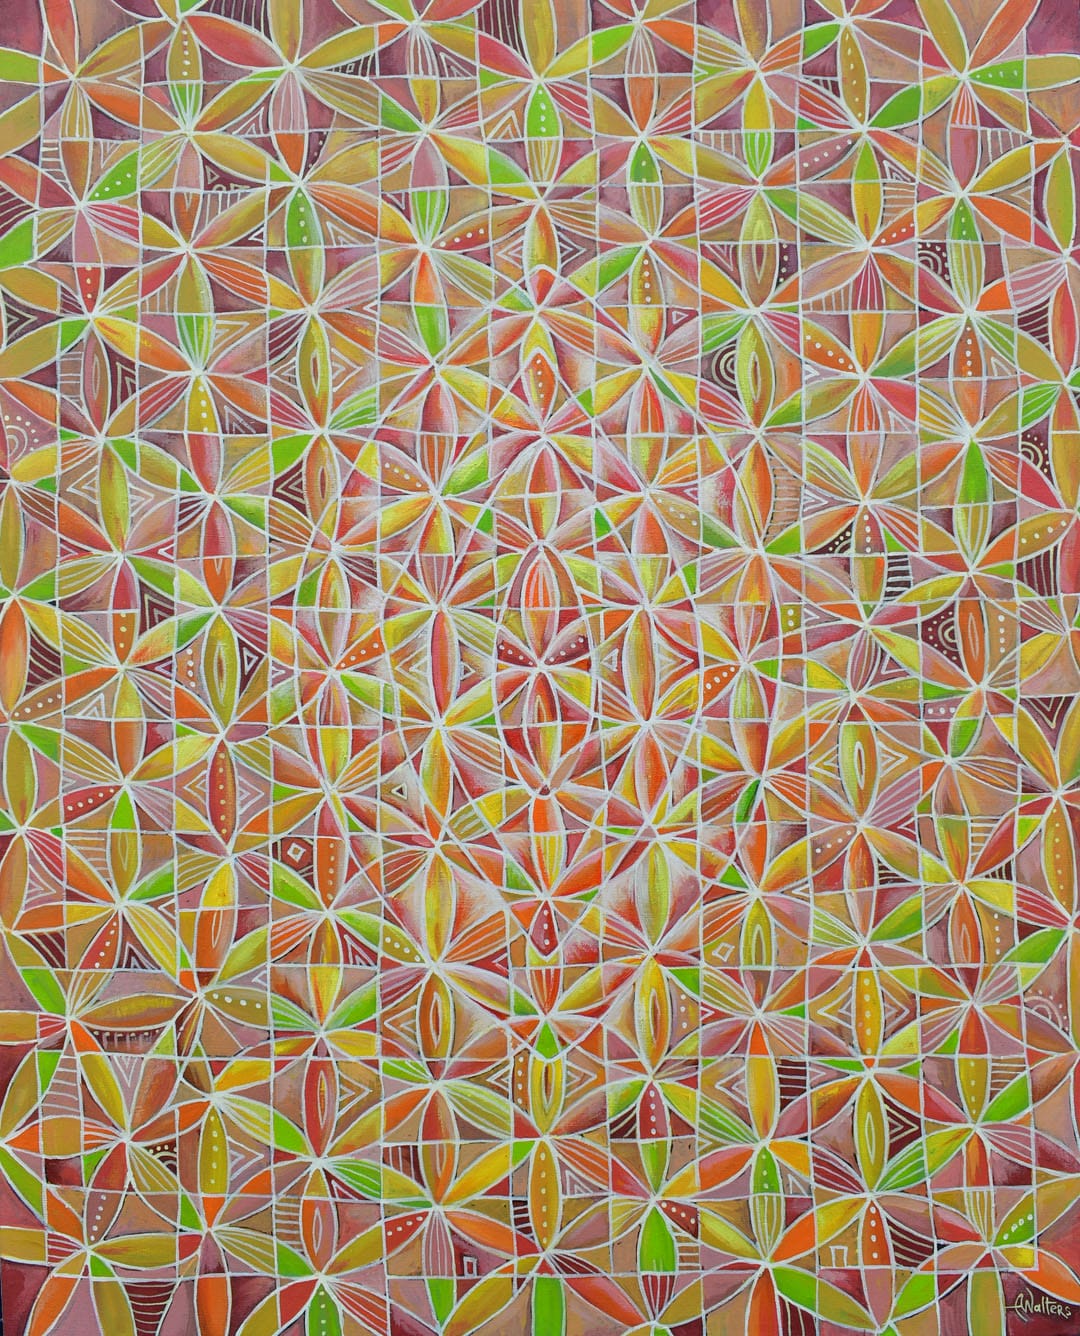 Flower of Life painting of vagina